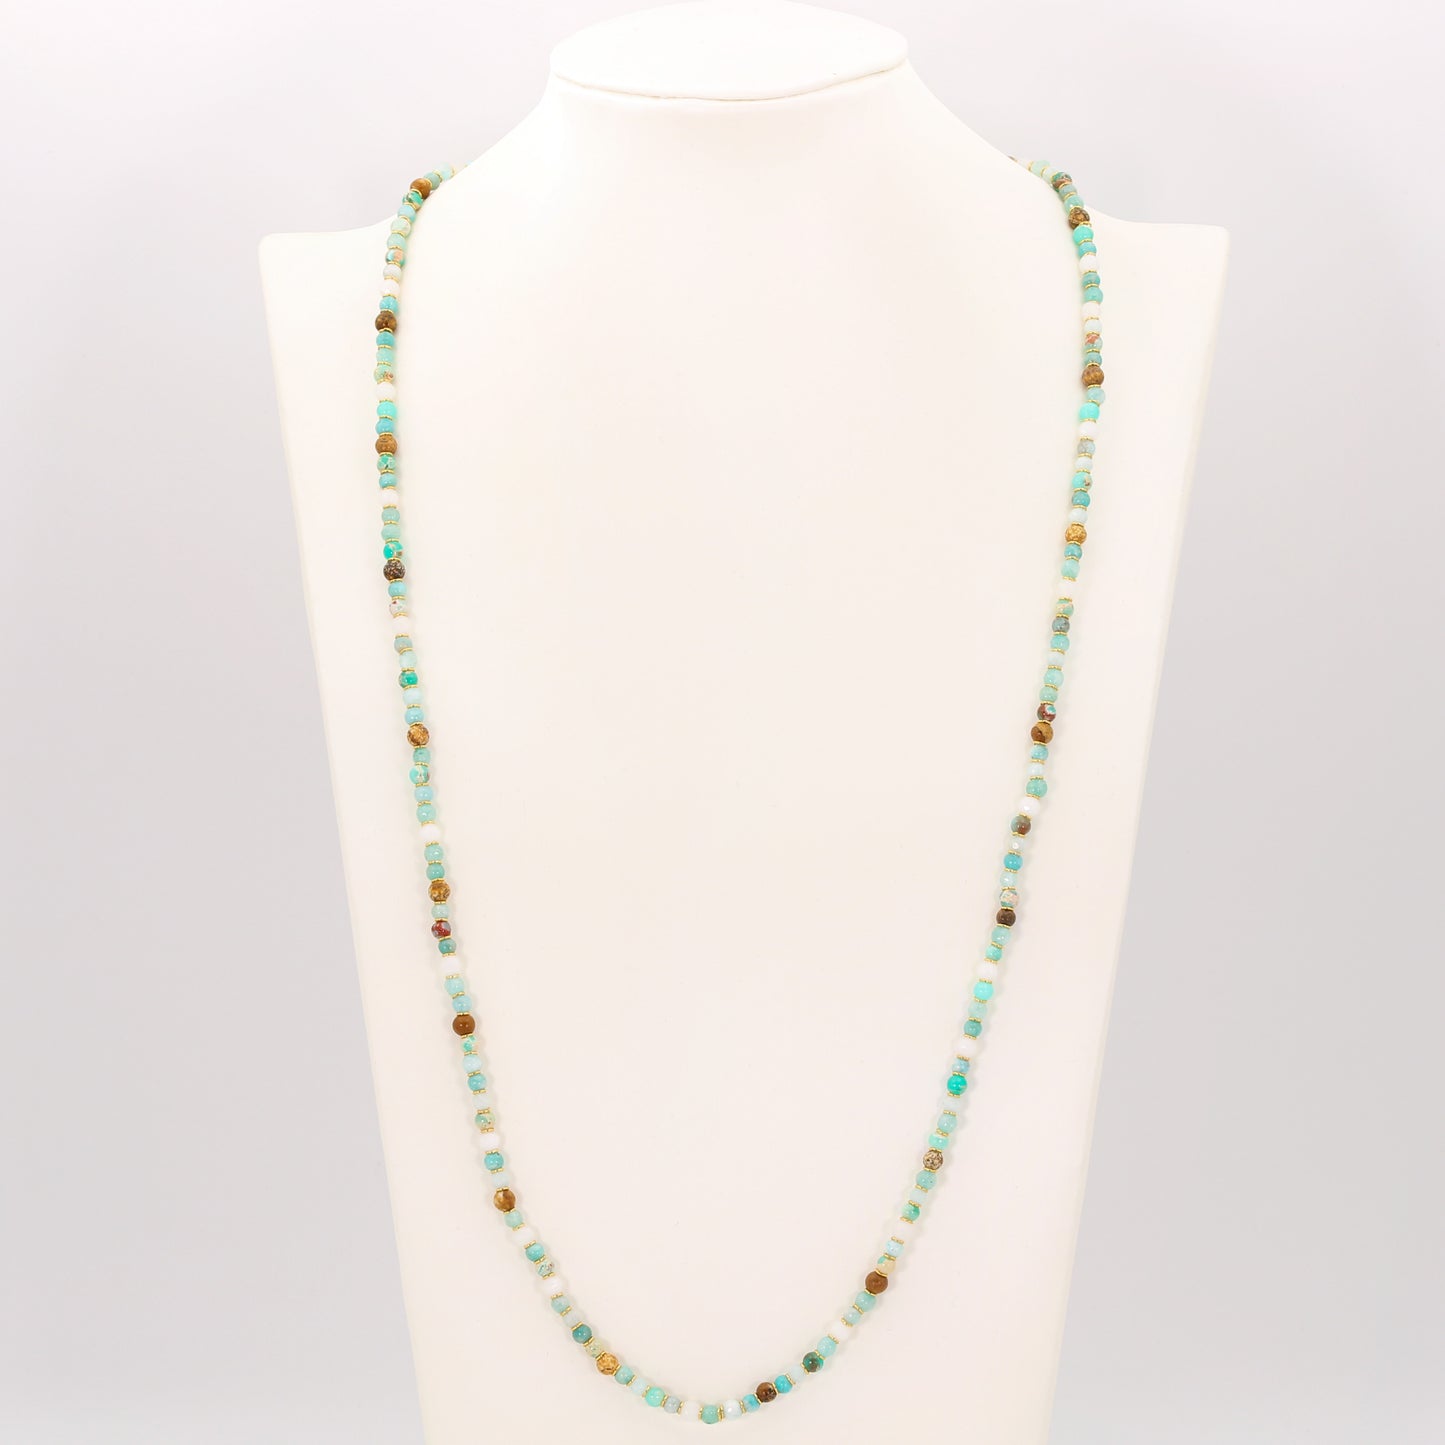 "Turcicus Medium 80" Necklace - CAORLE THE SMALL VENICE Collection